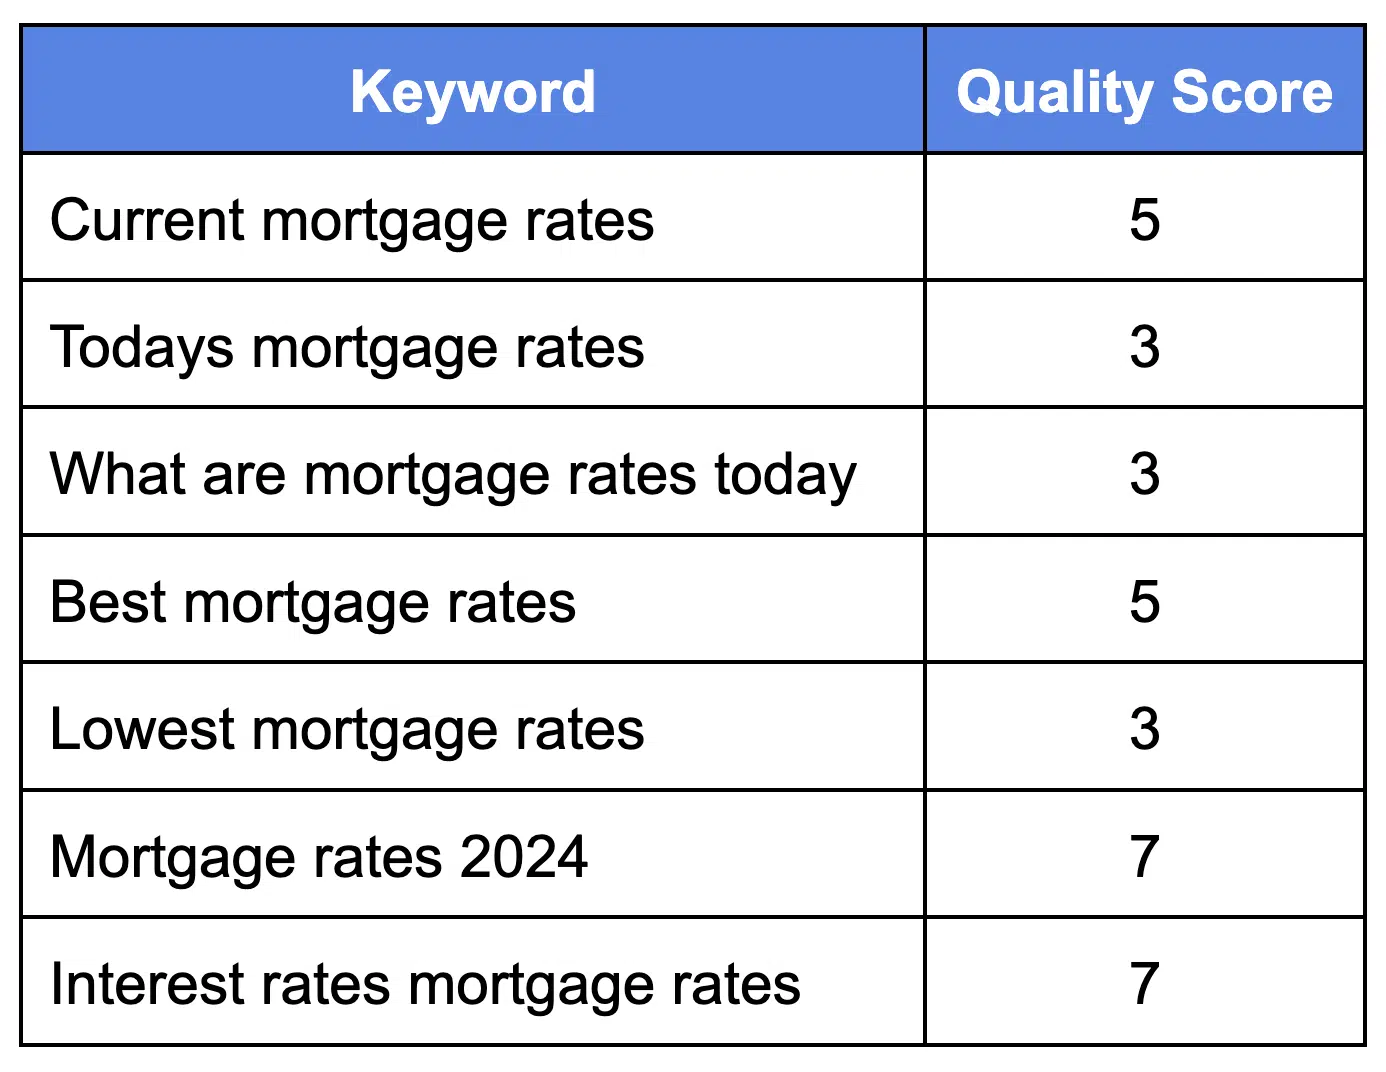 Quality scores for terms related to 'mortgage rates'